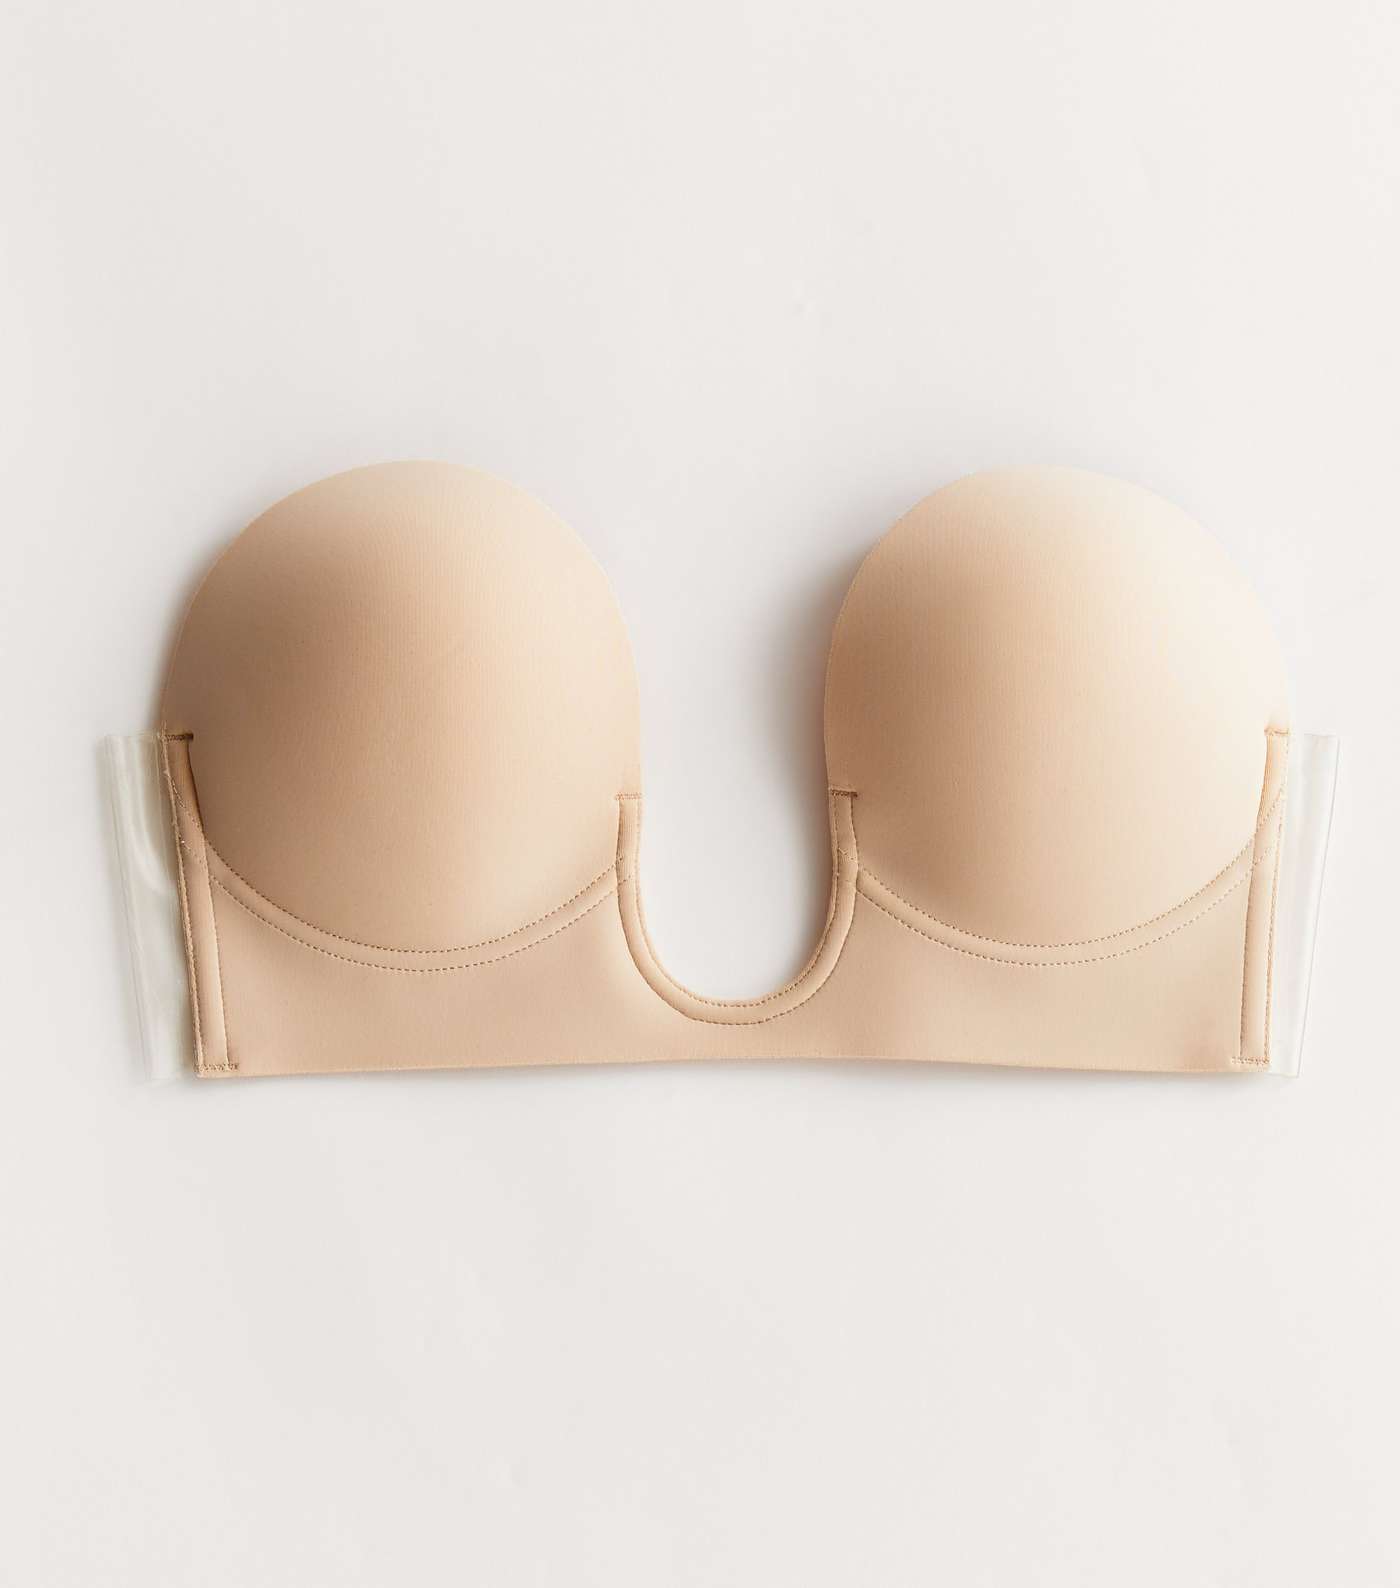 Perfection Beauty Tan A Cup Plunge Stick On Bra Image 5